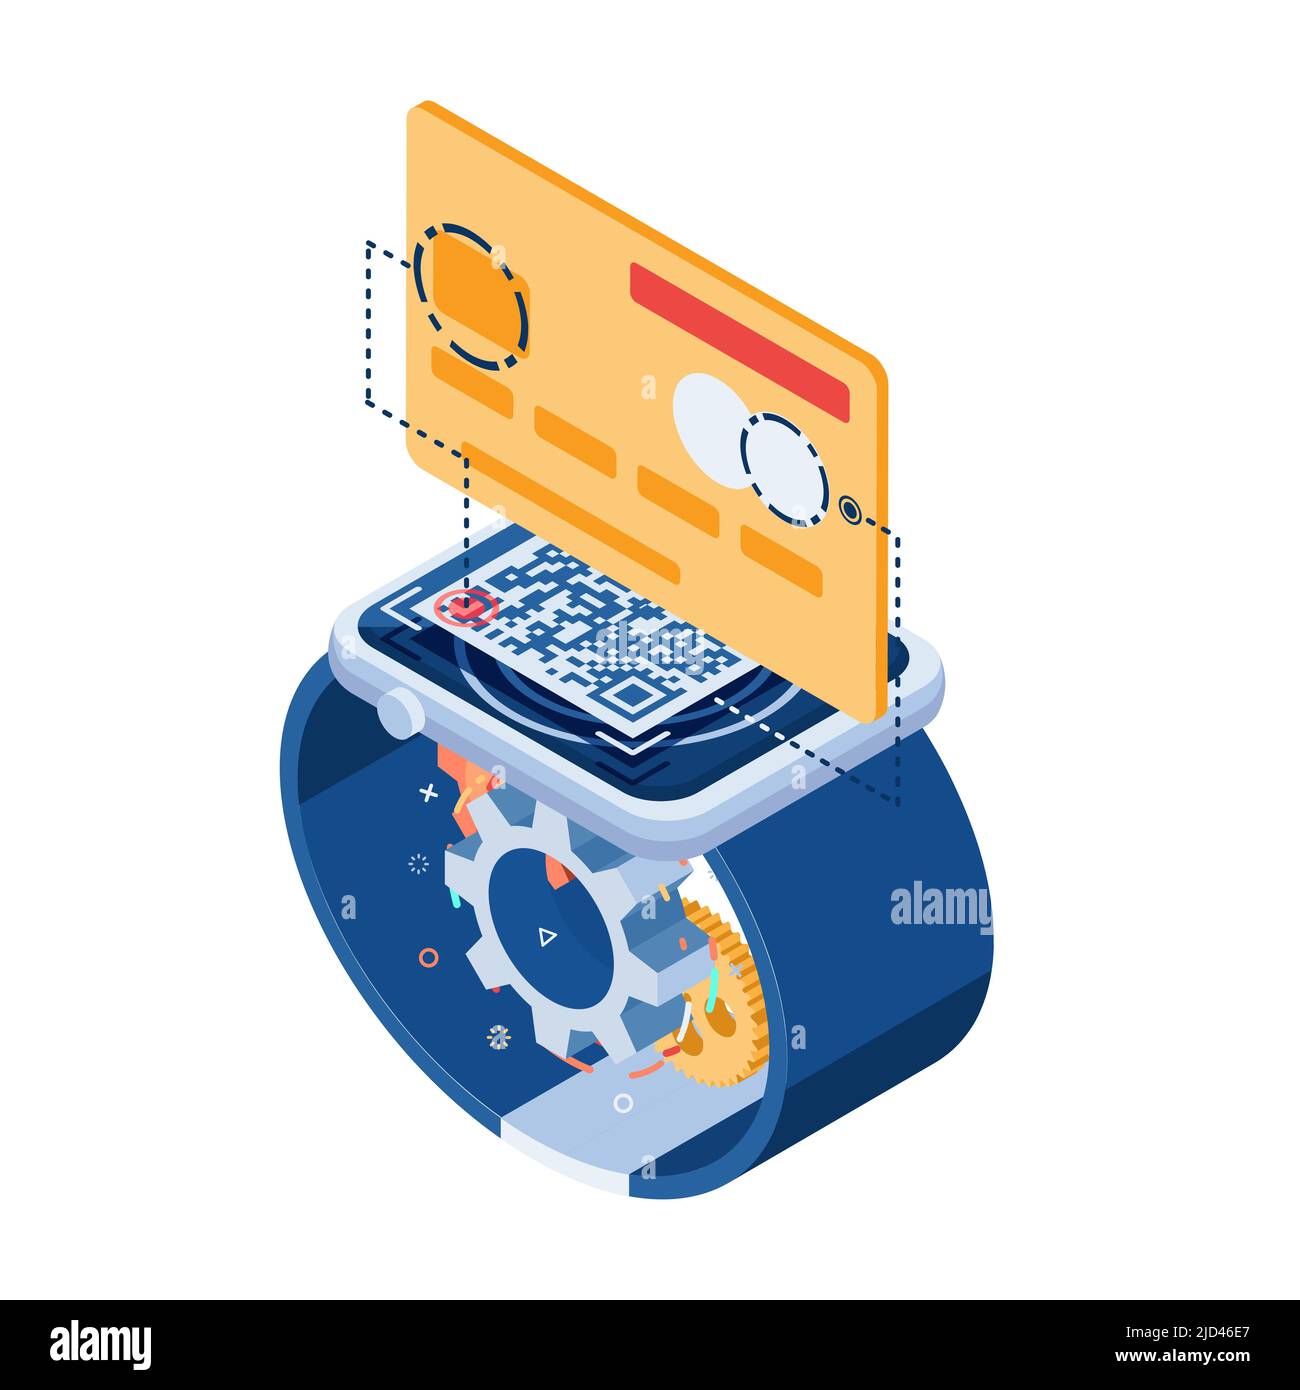 Flat 3d Isometric Credit Card QR Payment on Smartwatch. Contactless Wearable Payment Technology Concept. Stock Vector